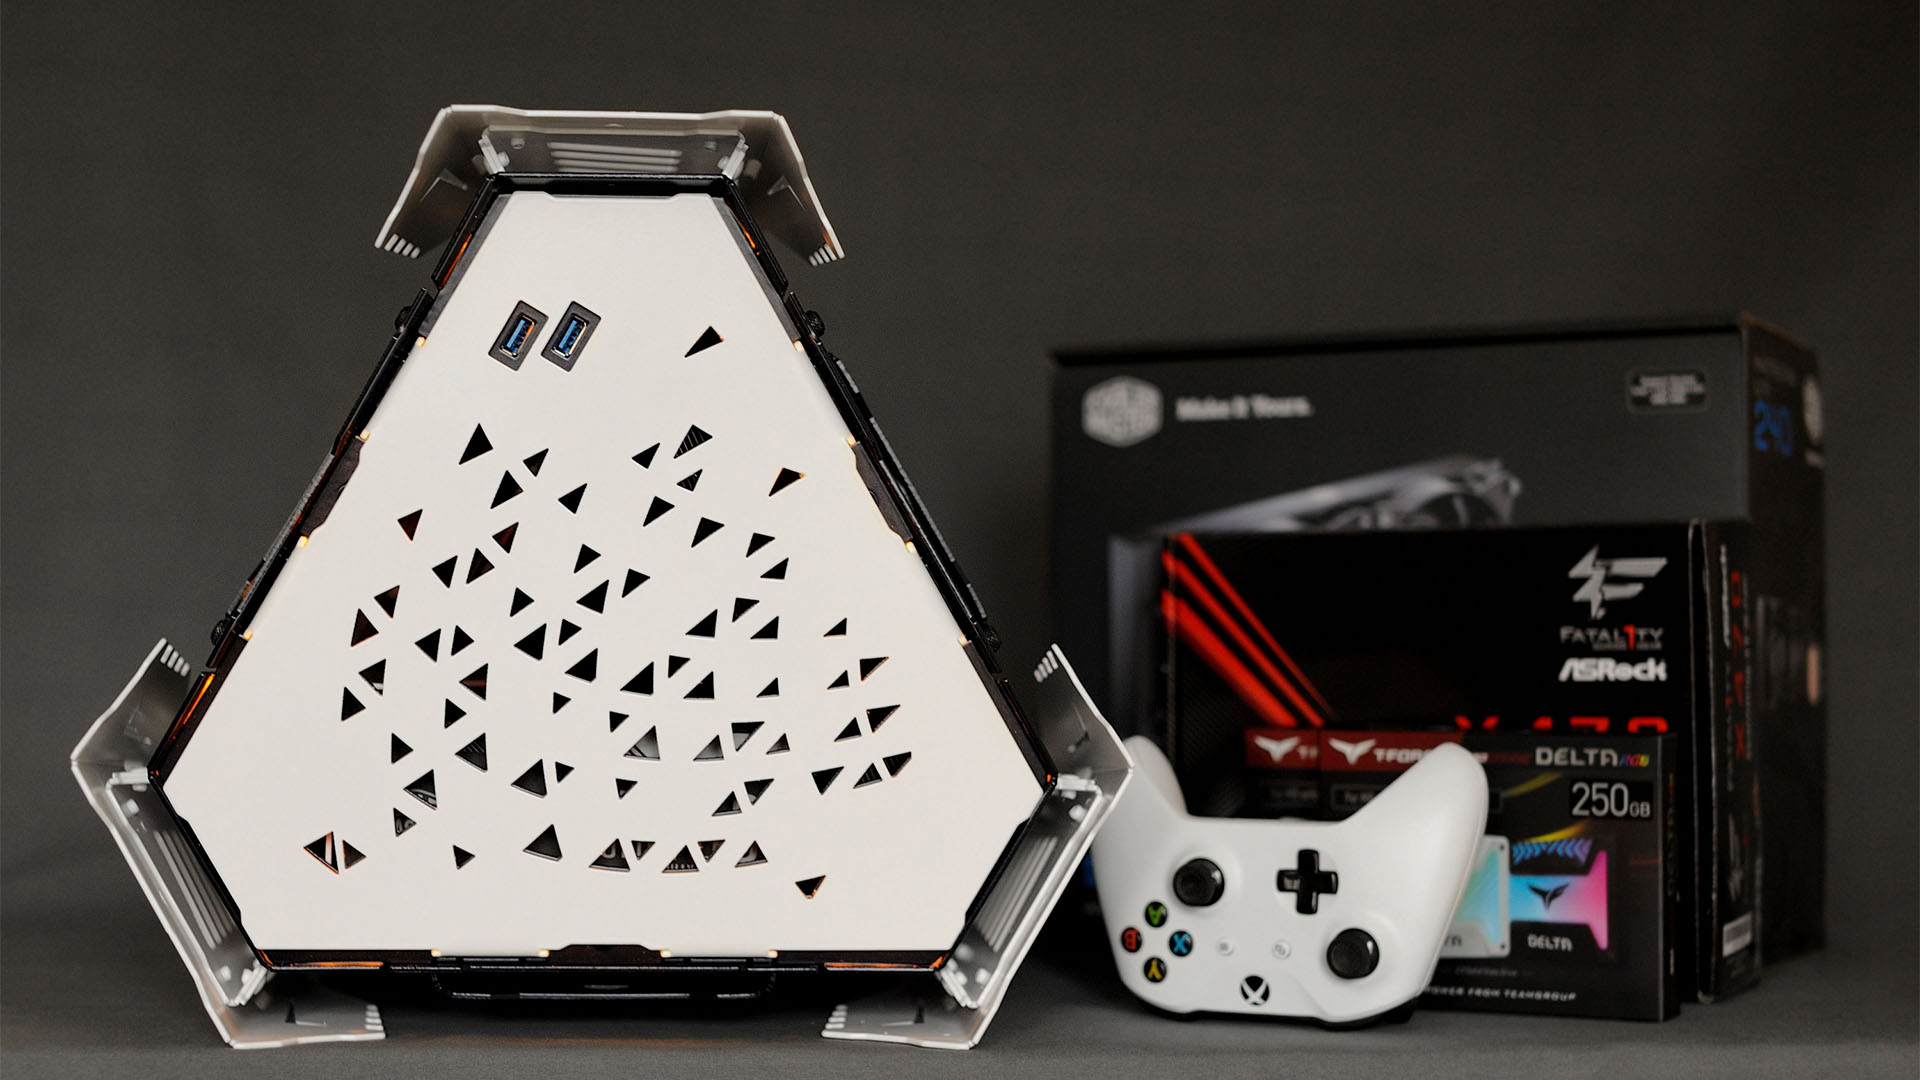 A space gaming pc inspired by sputnik